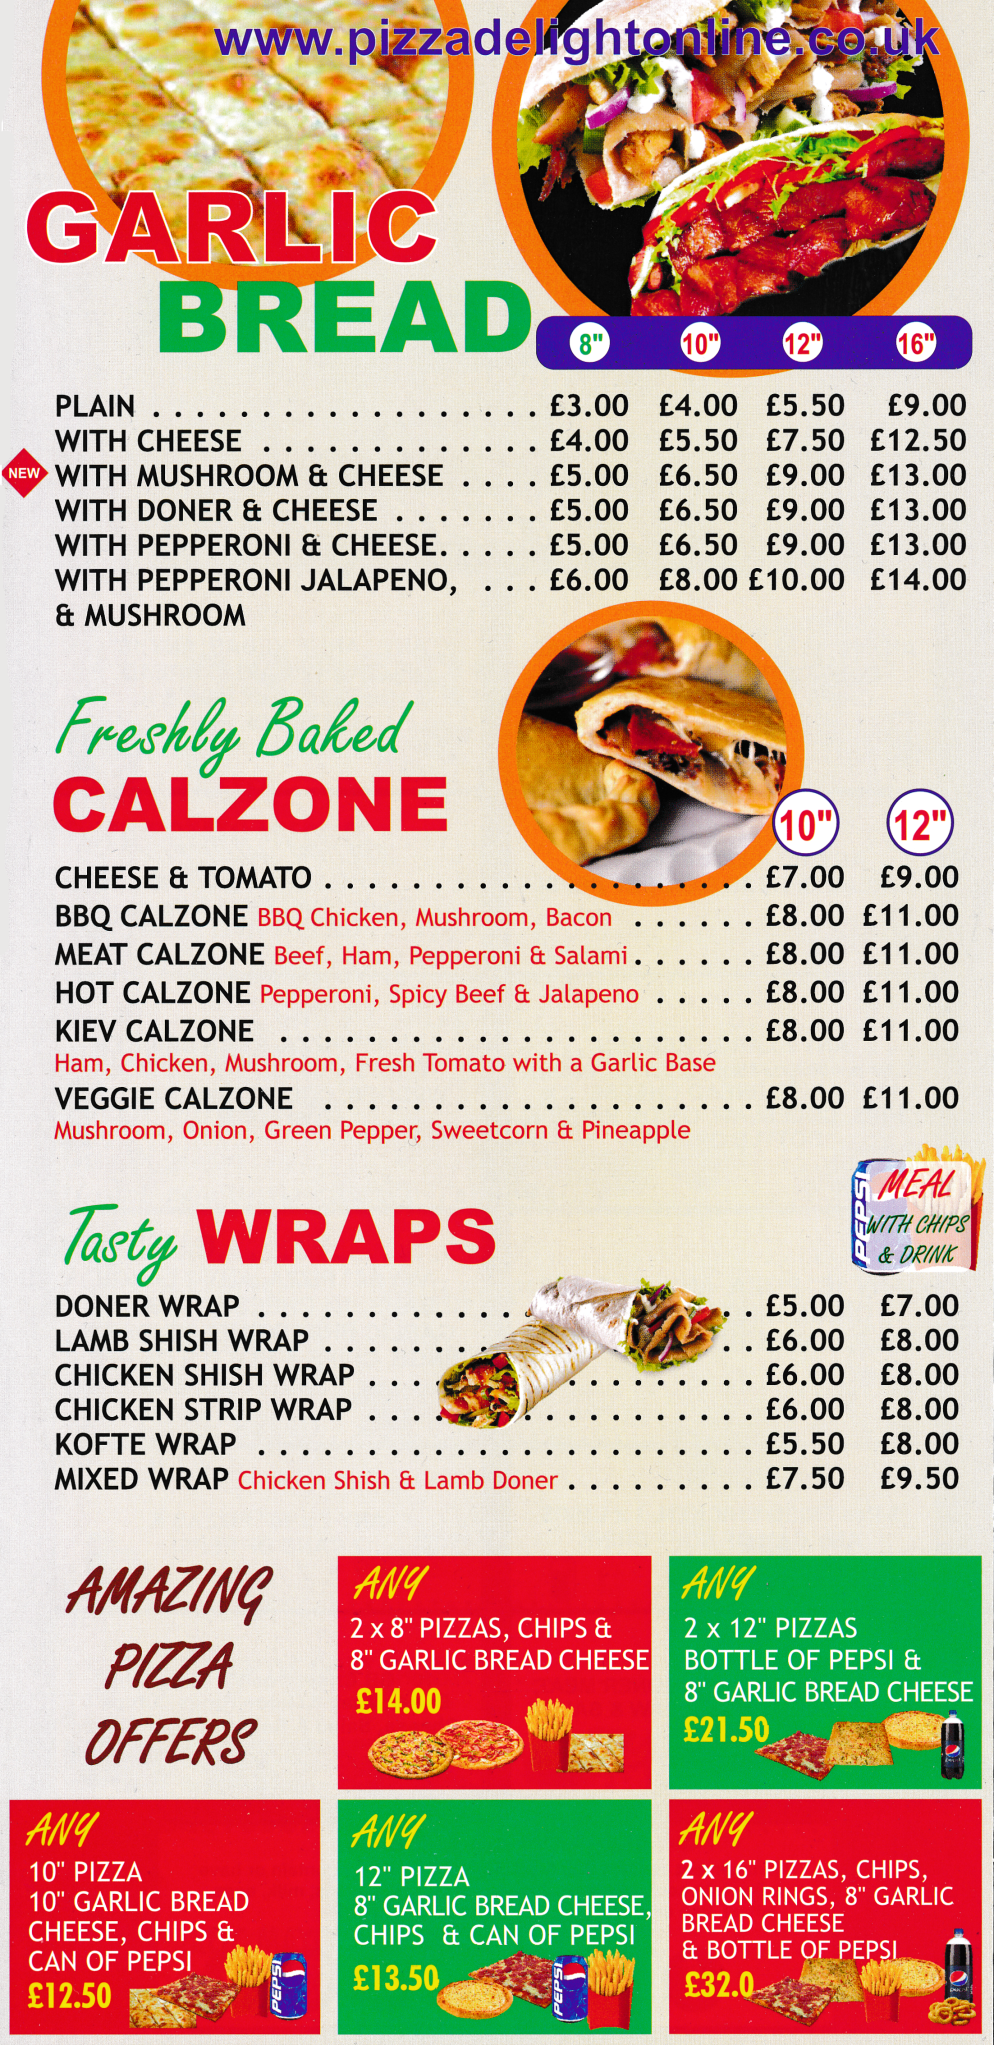 Menu for Pizza Delight - Pizza Offers, Garlic Bread, Freshly Baked Cazlones, Tasty Wraps..